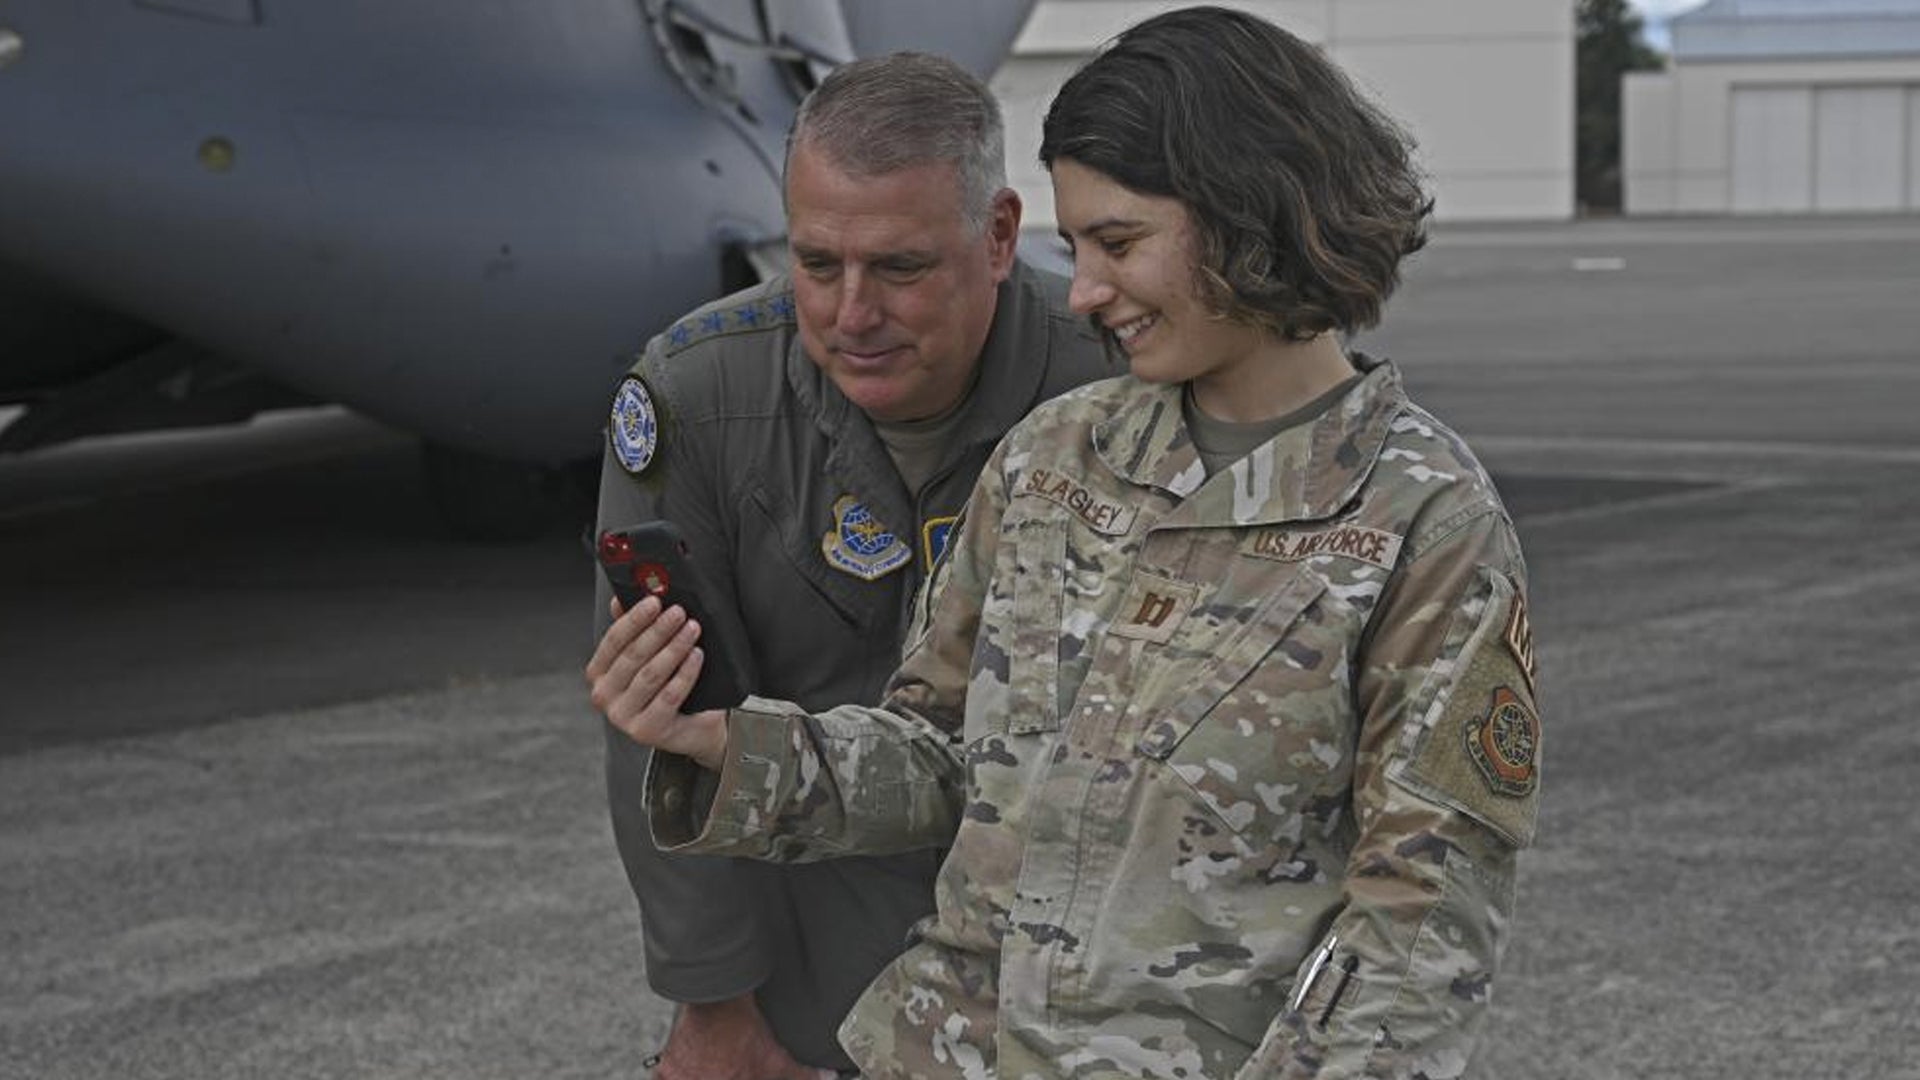 U.S. Air Force Gen. Mike Minihan, left, Air Mobility Command commander, and Capt. Madeline Slagley, 62nd Maintenance Squadron officer in charge, FaceTime Slagley’s family at Joint Base Lewis-McChord, Washington, July 7, 2022. Minihan coined Slagley as a star performer during his visit to JBLM. (Senior Airman Callie Norton/U.S. Air Force)